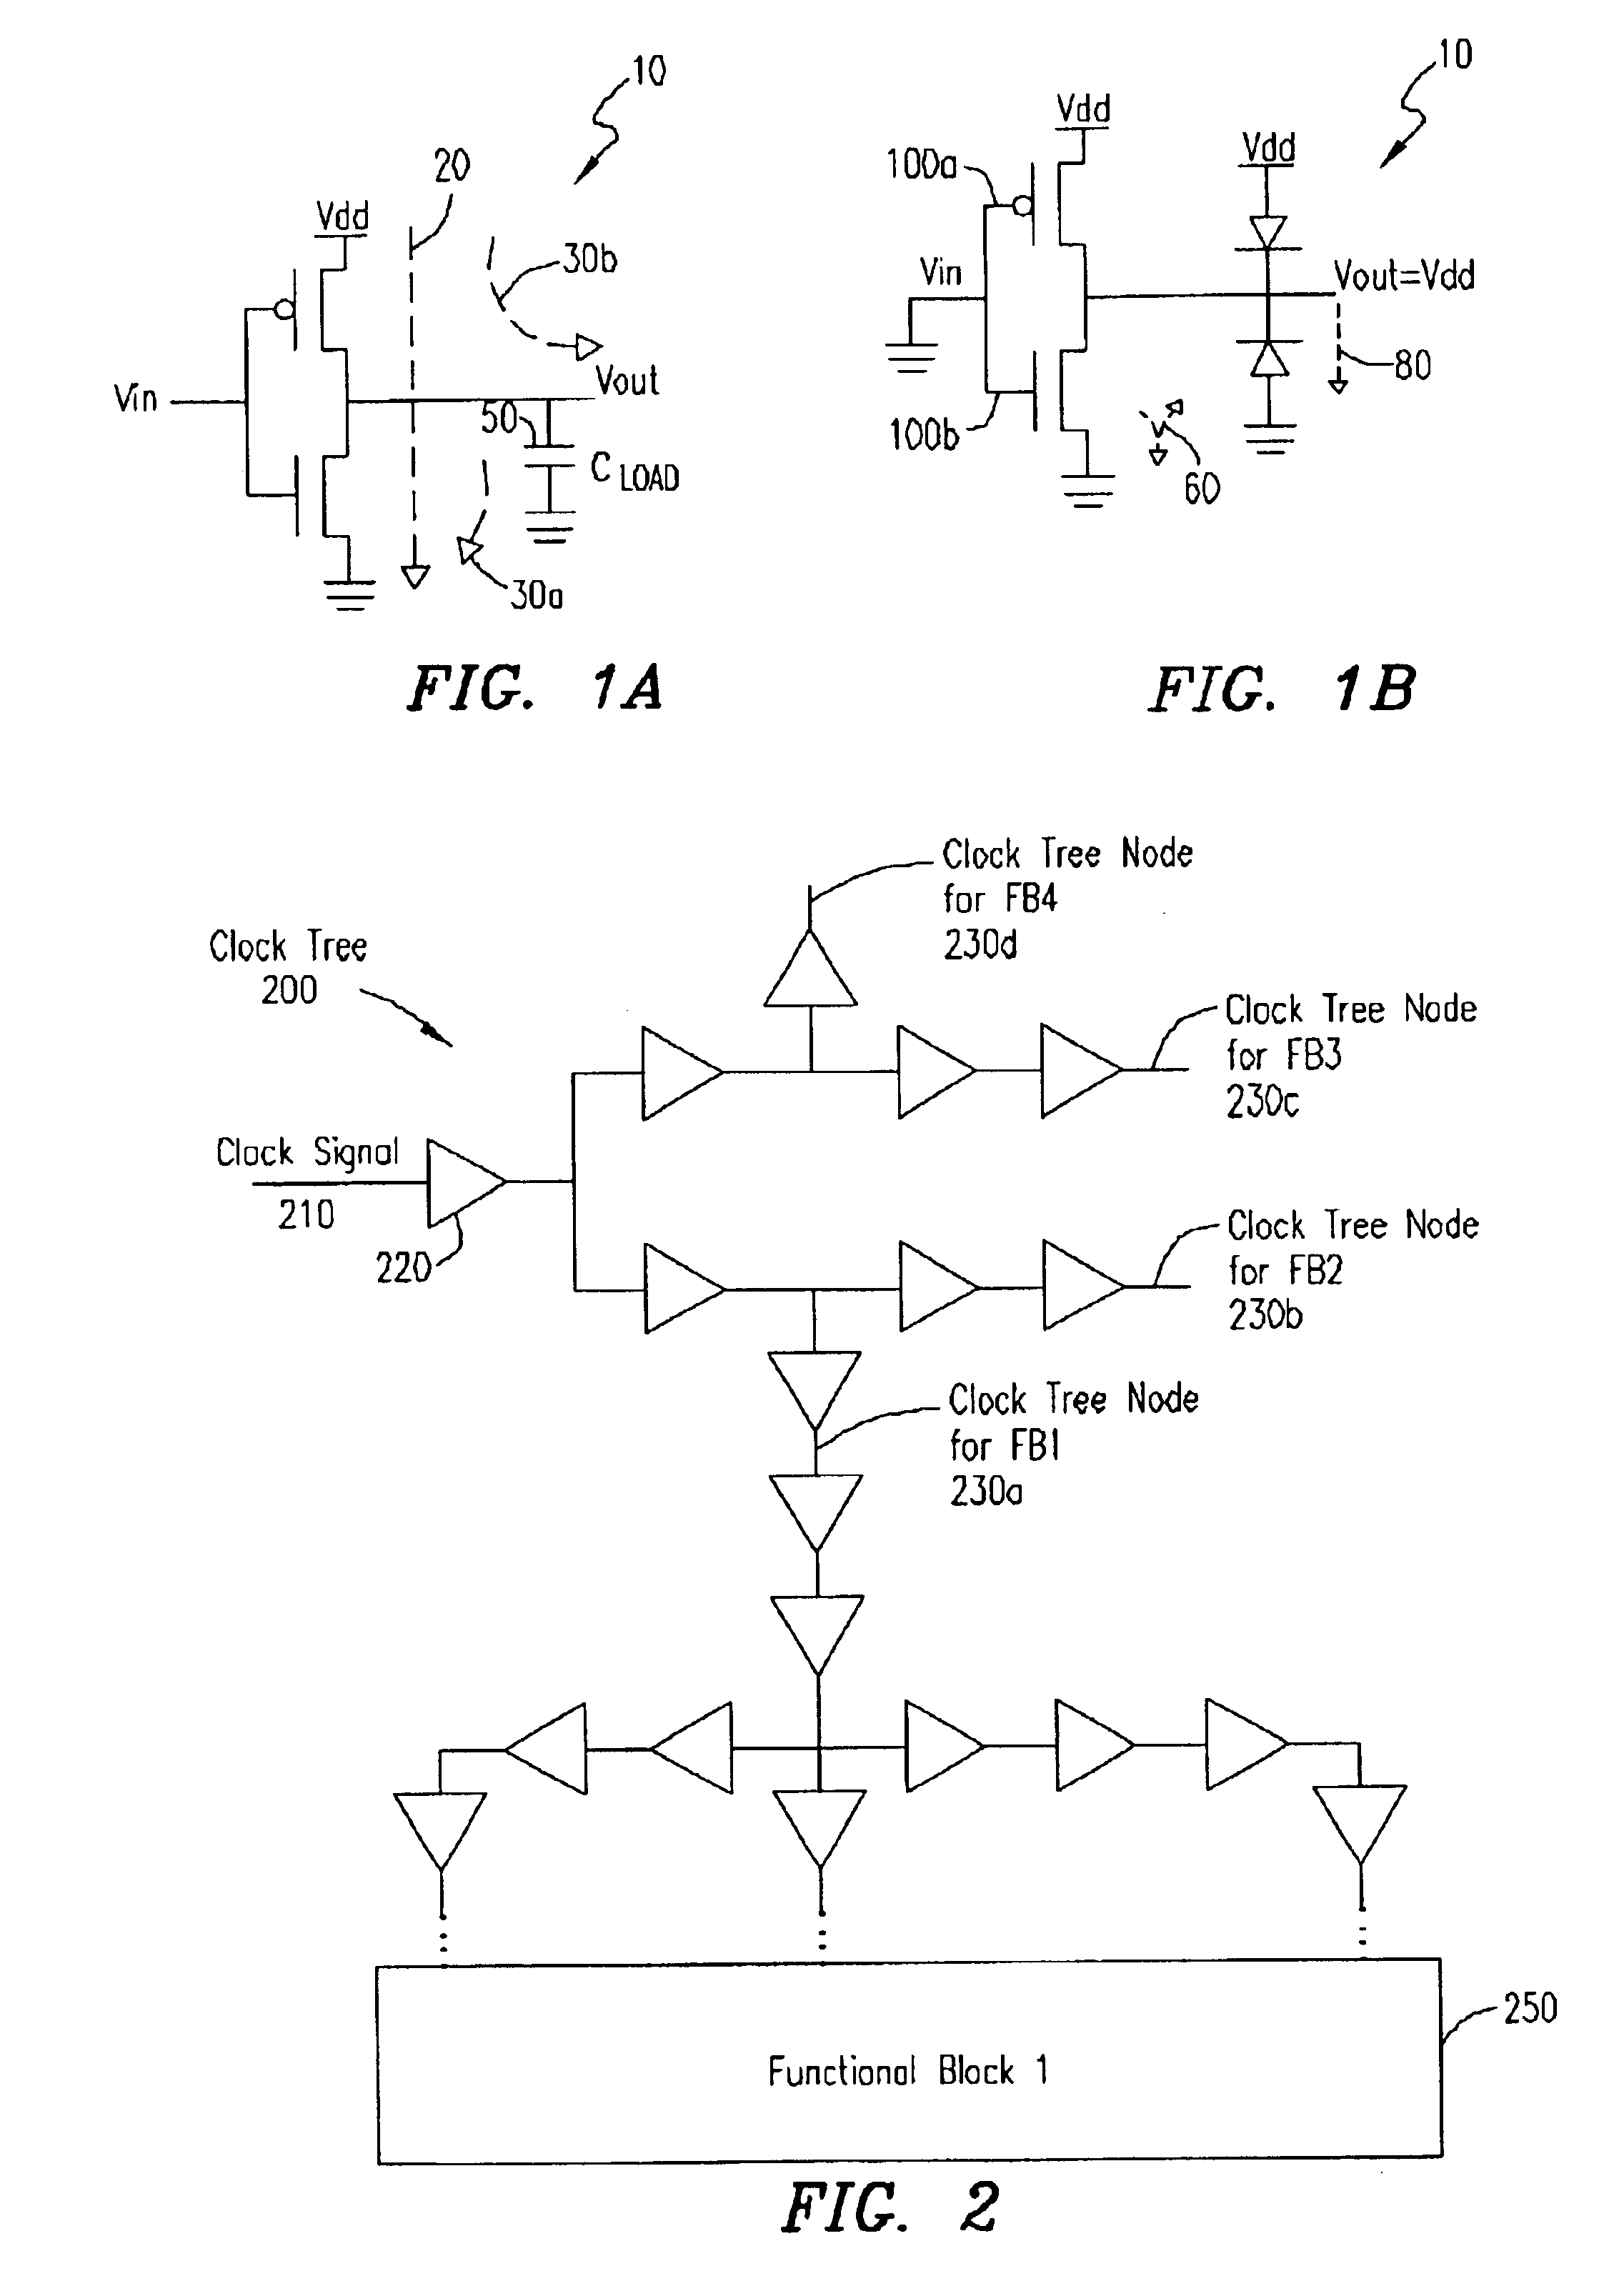 Method and apparatus for clock gating clock trees to reduce power dissipation